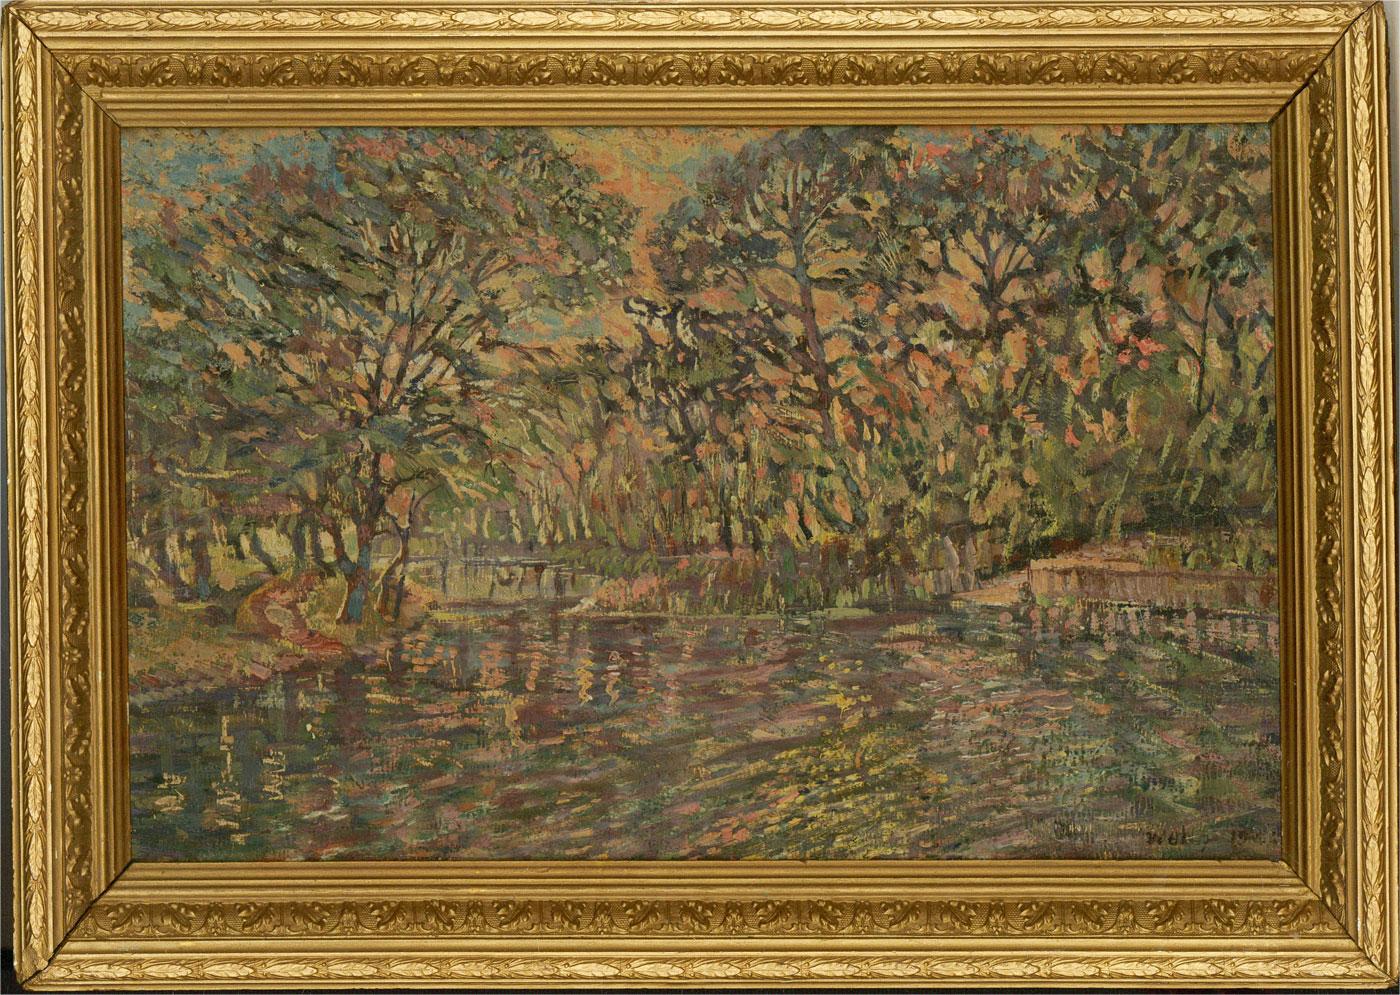 A delicate and compelling post-impressionist river scene showing a sparkling river winding its way between banks lined with leafy trees. The artist has used an earthy palette with gentle highlights to add naturalism to the gestural painting. The